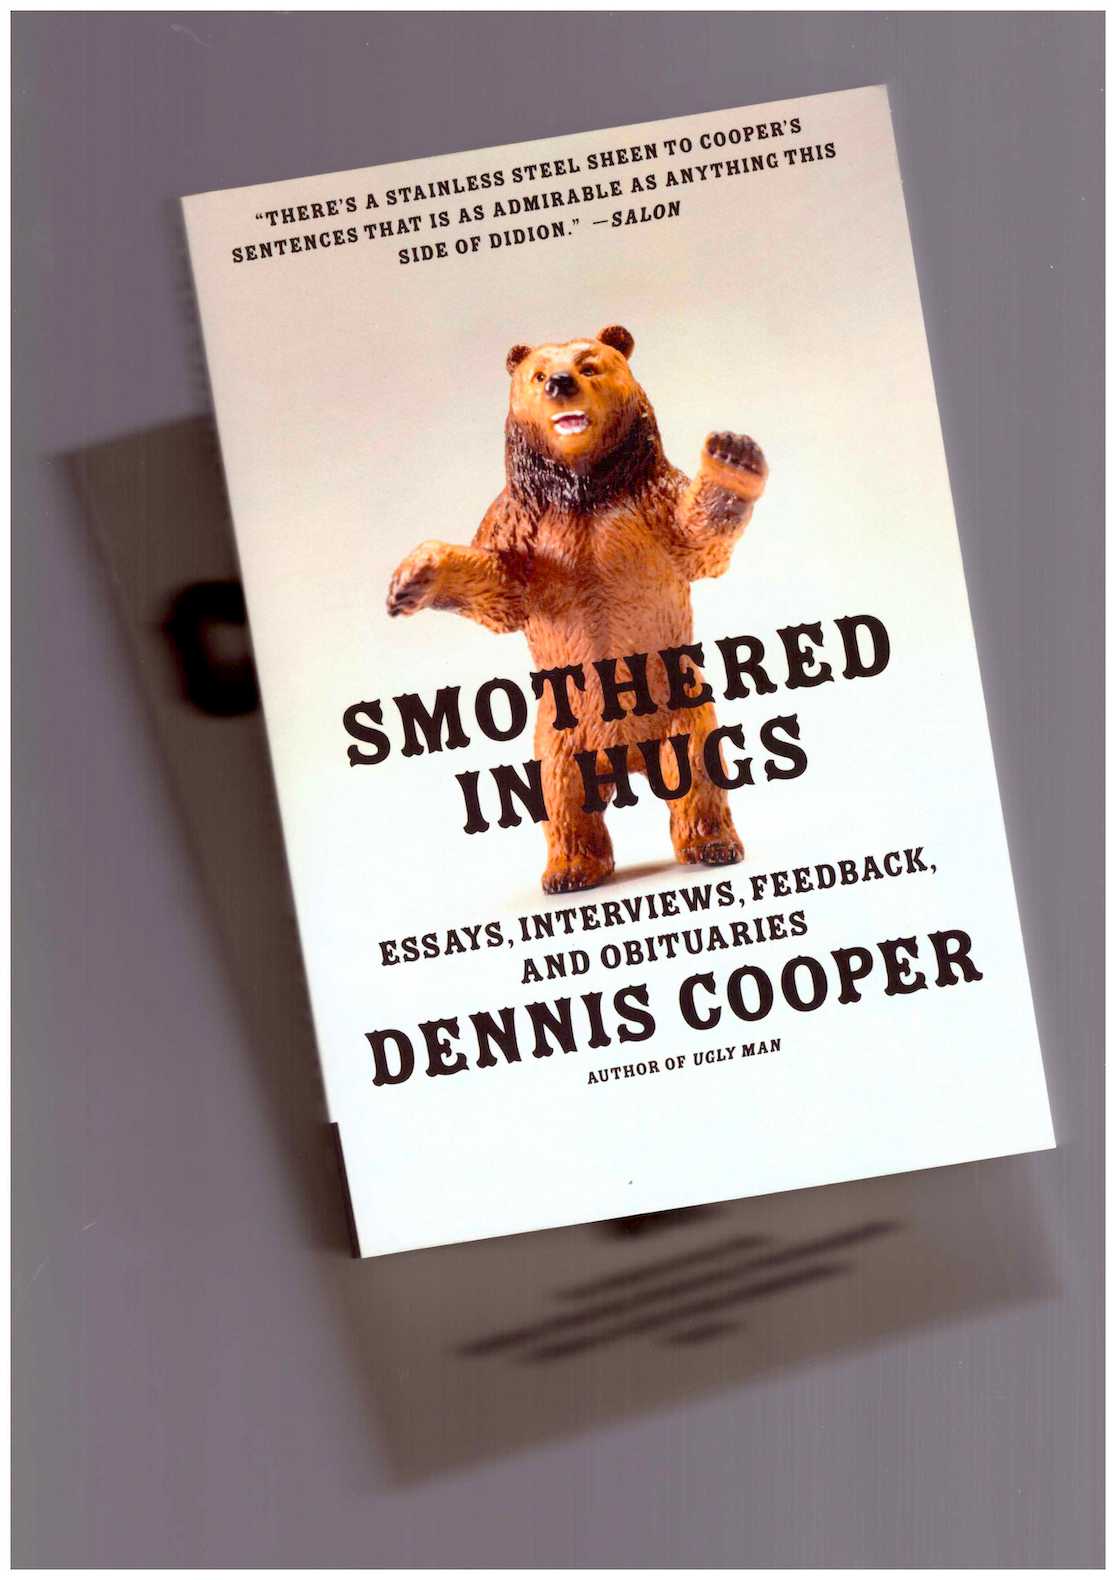 COOPER, Dennis - Smothered in Hugs